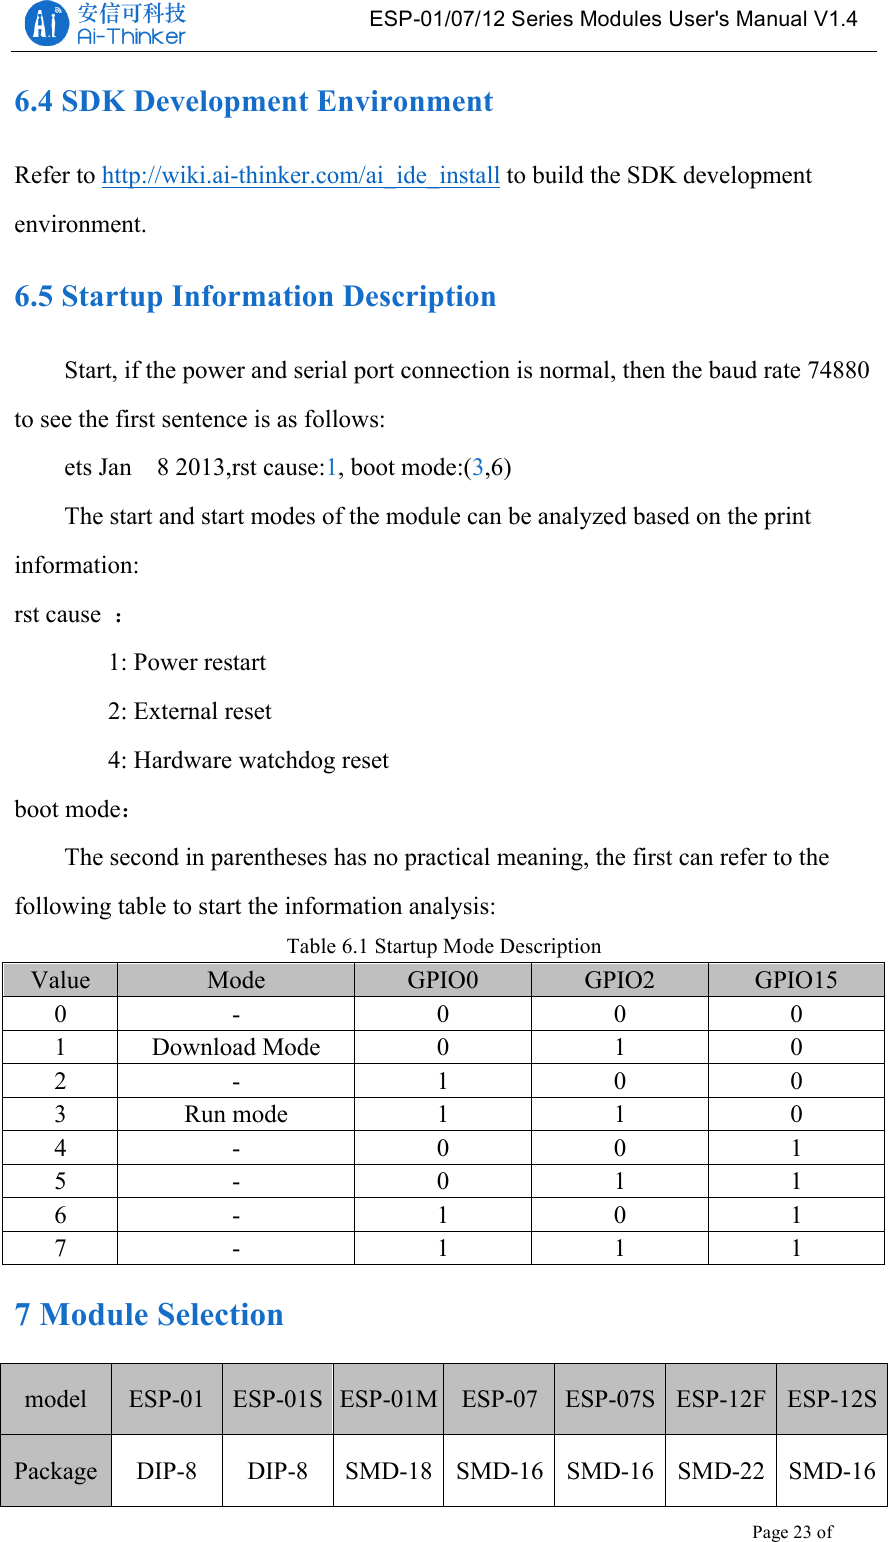   ESP-01/07/12 Series Modules User&apos;s Manual V1.4 Copyright © 2017 Shenzhen Ai-Thinker Technology Co., Ltd All Rights Reserved Page 23 of 23   6.4 SDK Development Environment Refer to http://wiki.ai-thinker.com/ai_ide_install to build the SDK development environment. 6.5 Startup Information Description Start, if the power and serial port connection is normal, then the baud rate 74880 to see the first sentence is as follows: ets Jan    8 2013,rst cause:1, boot mode:(3,6) The start and start modes of the module can be analyzed based on the print information: rst cause  ： 1: Power restart 2: External reset 4: Hardware watchdog reset boot mode： The second in parentheses has no practical meaning, the first can refer to the following table to start the information analysis: Table 6.1 Startup Mode Description Value Mode GPIO0 GPIO2 GPIO15 0 - 0 0 0 1 Download Mode 0 1 0 2 - 1 0 0 3 Run mode 1 1 0 4 - 0 0 1 5 - 0 1 1 6 - 1 0 1 7 - 1 1 1 7 Module Selection model ESP-01 ESP-01S ESP-01M ESP-07 ESP-07S ESP-12F ESP-12S Package DIP-8 DIP-8 SMD-18 SMD-16 SMD-16 SMD-22 SMD-16 